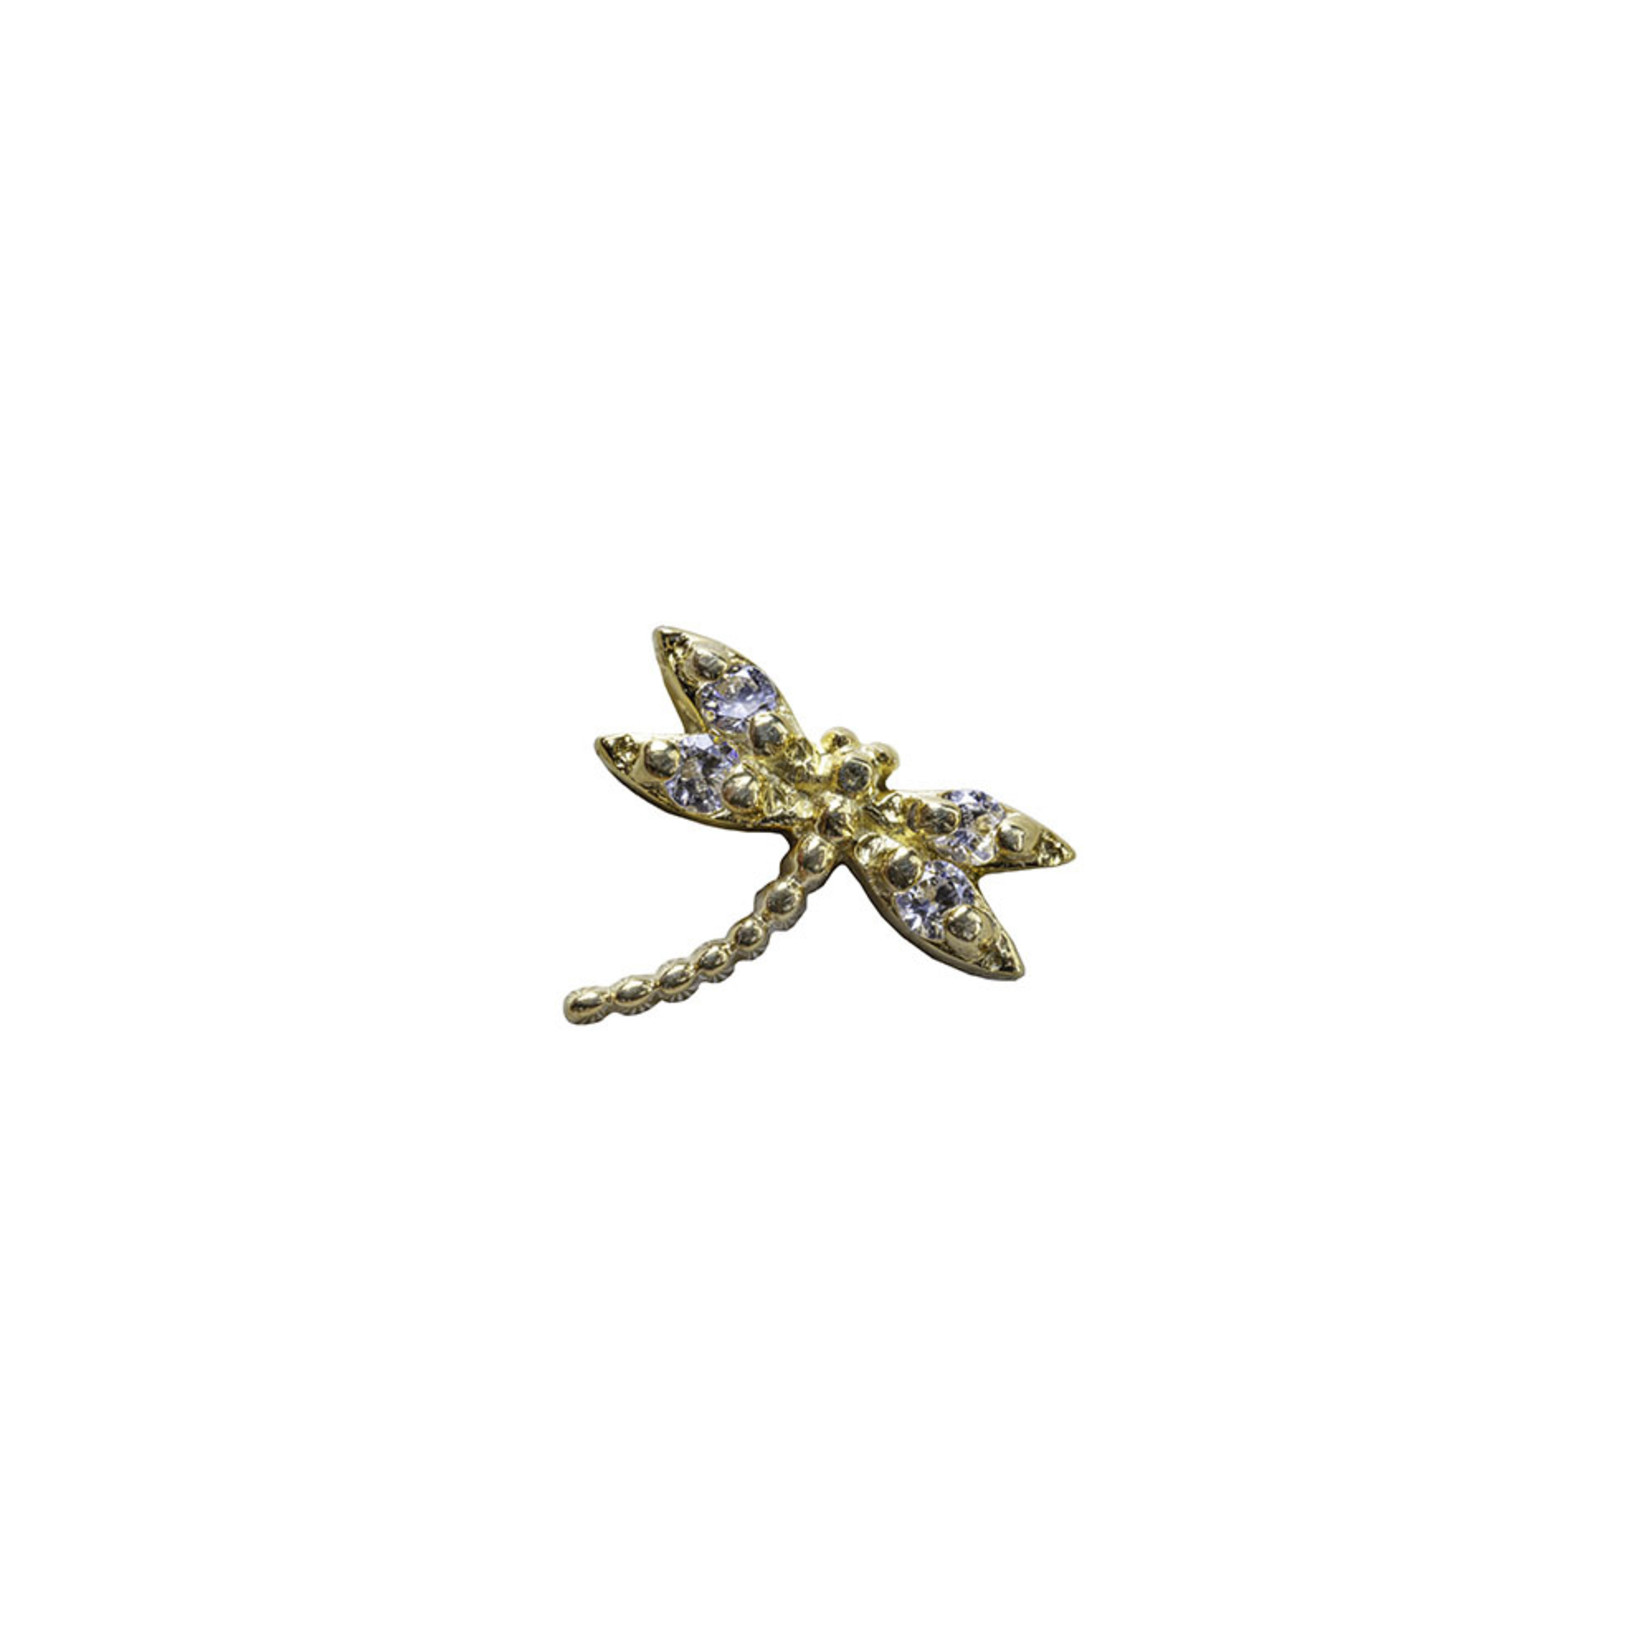 BVLA BVLA yellow gold "Damselfly" threaded end with 4x 1.0 CZ. Curved left